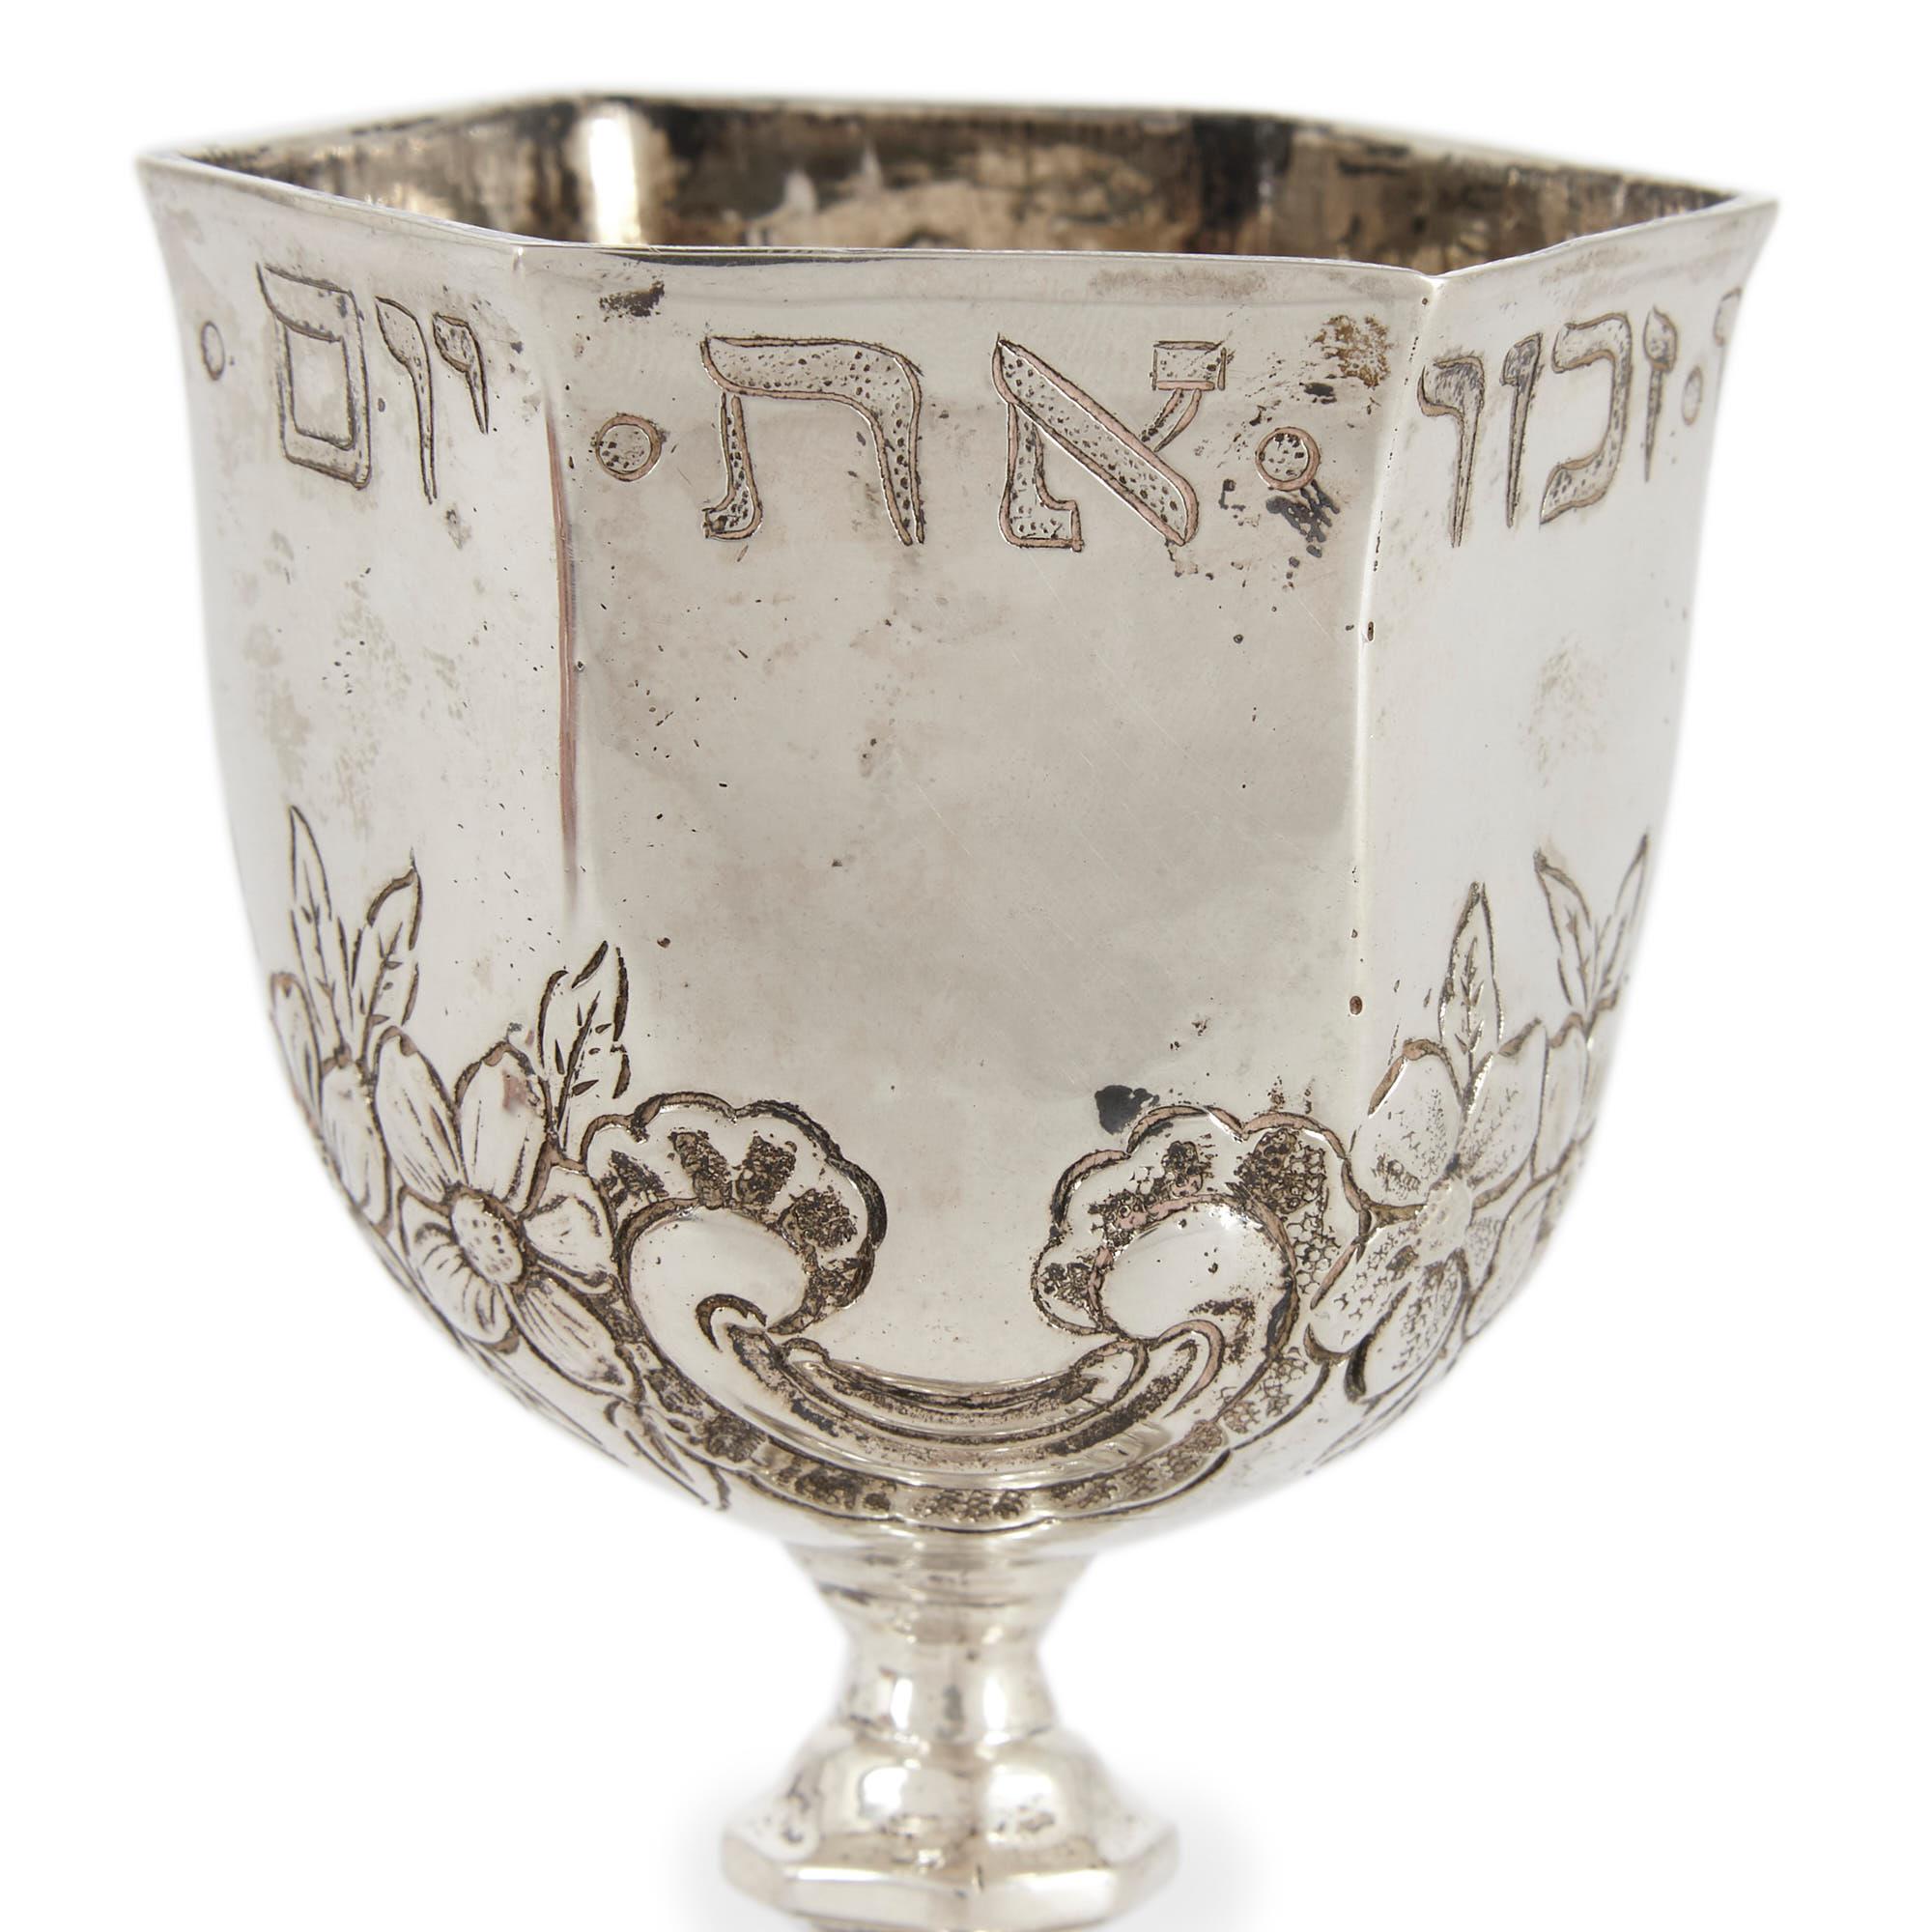 19th Century Silver Kiddush Cup in 18th Century Style from Germany